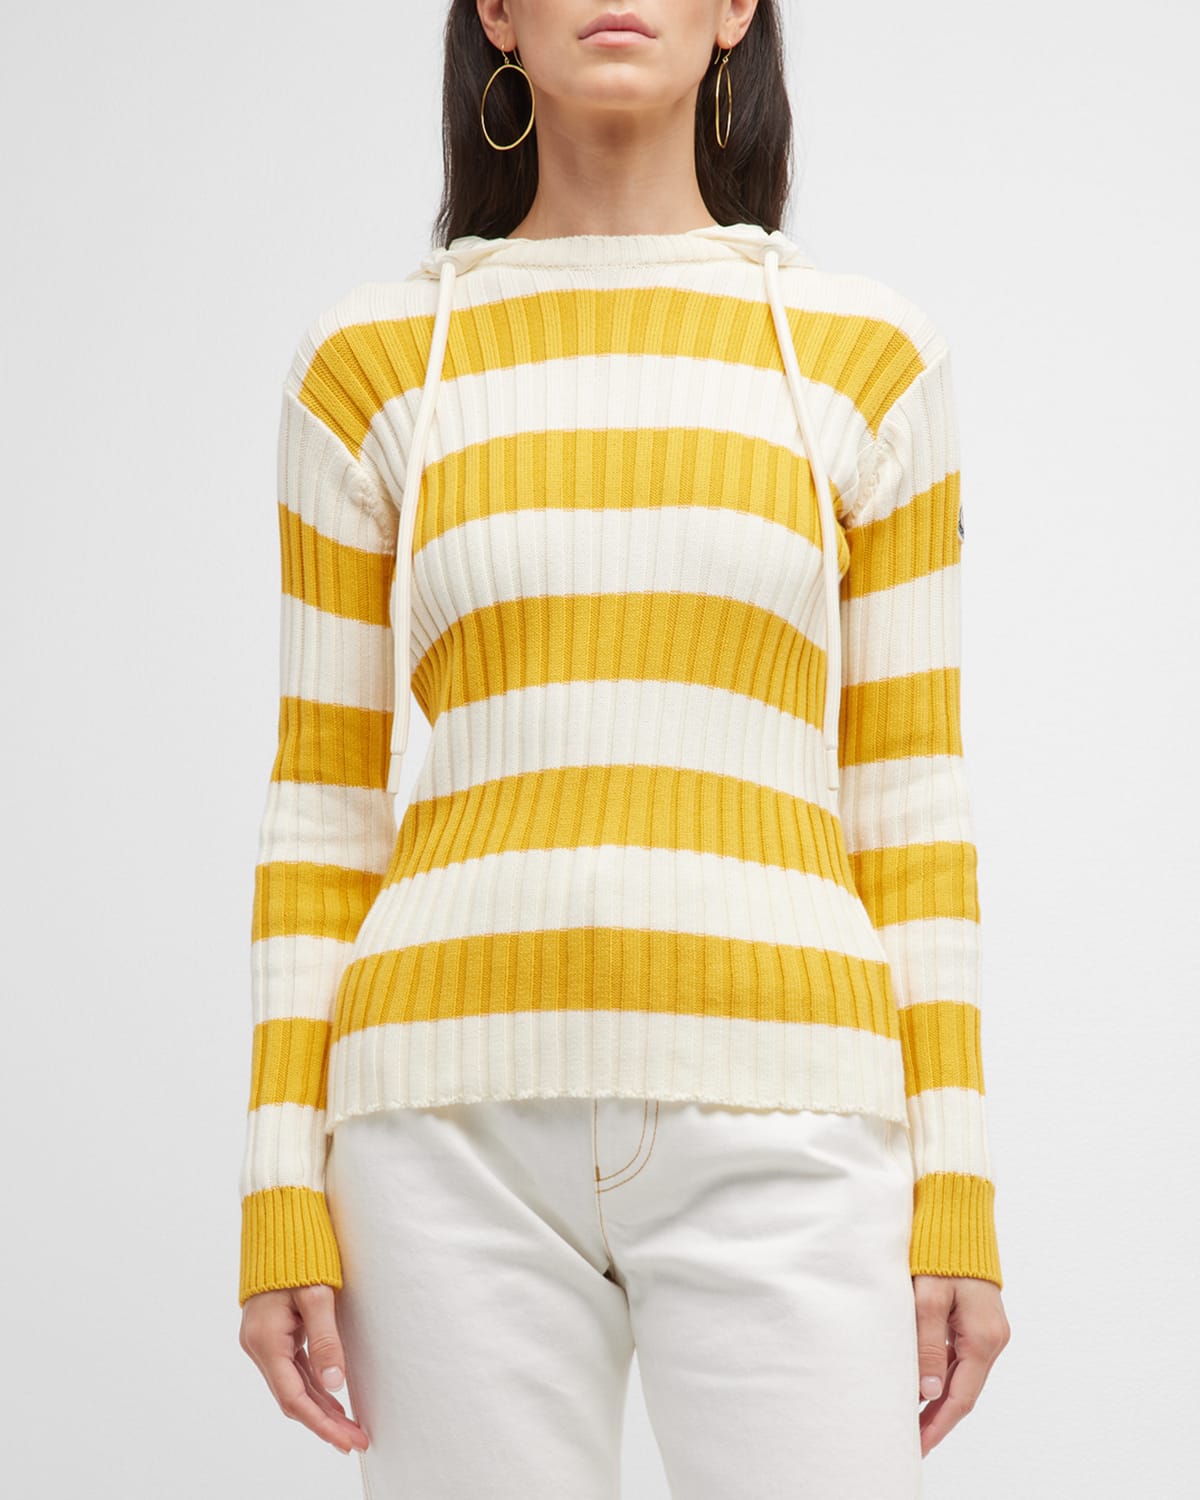 Moncler Striped Knit Hoodie Sweater In Yellow/white Stri